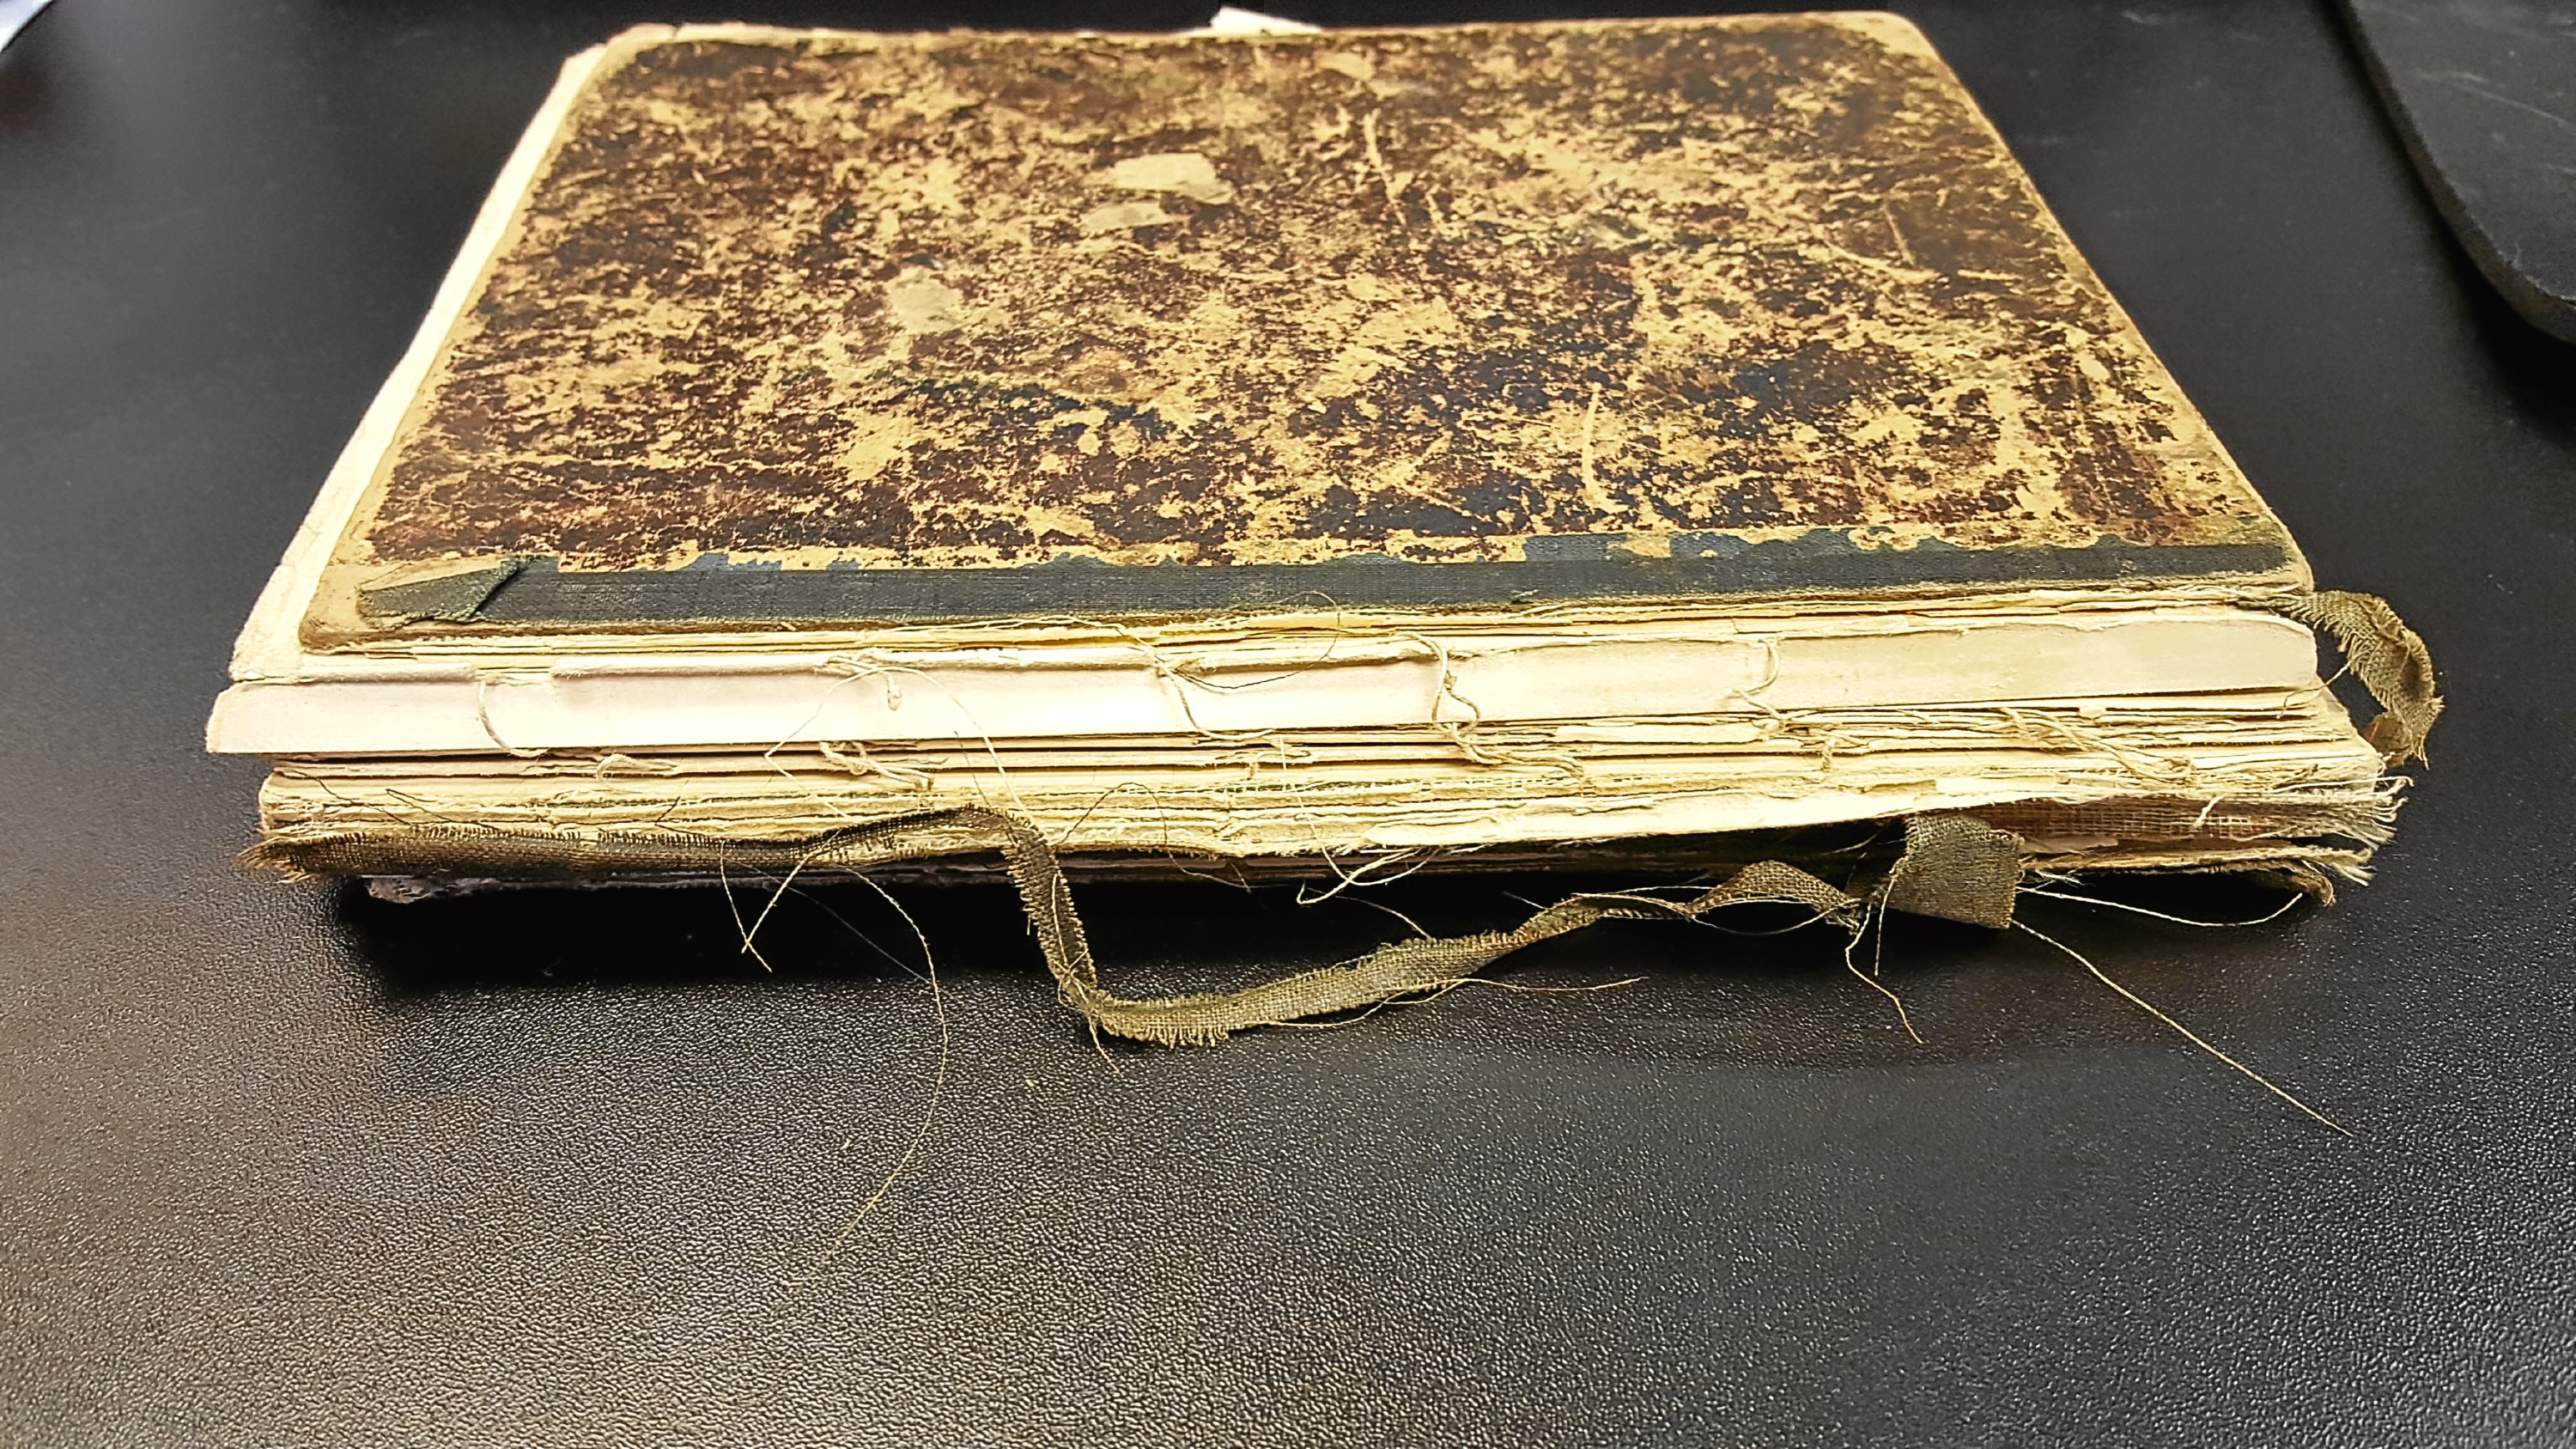 100 year old cookery book left at a Travelodge